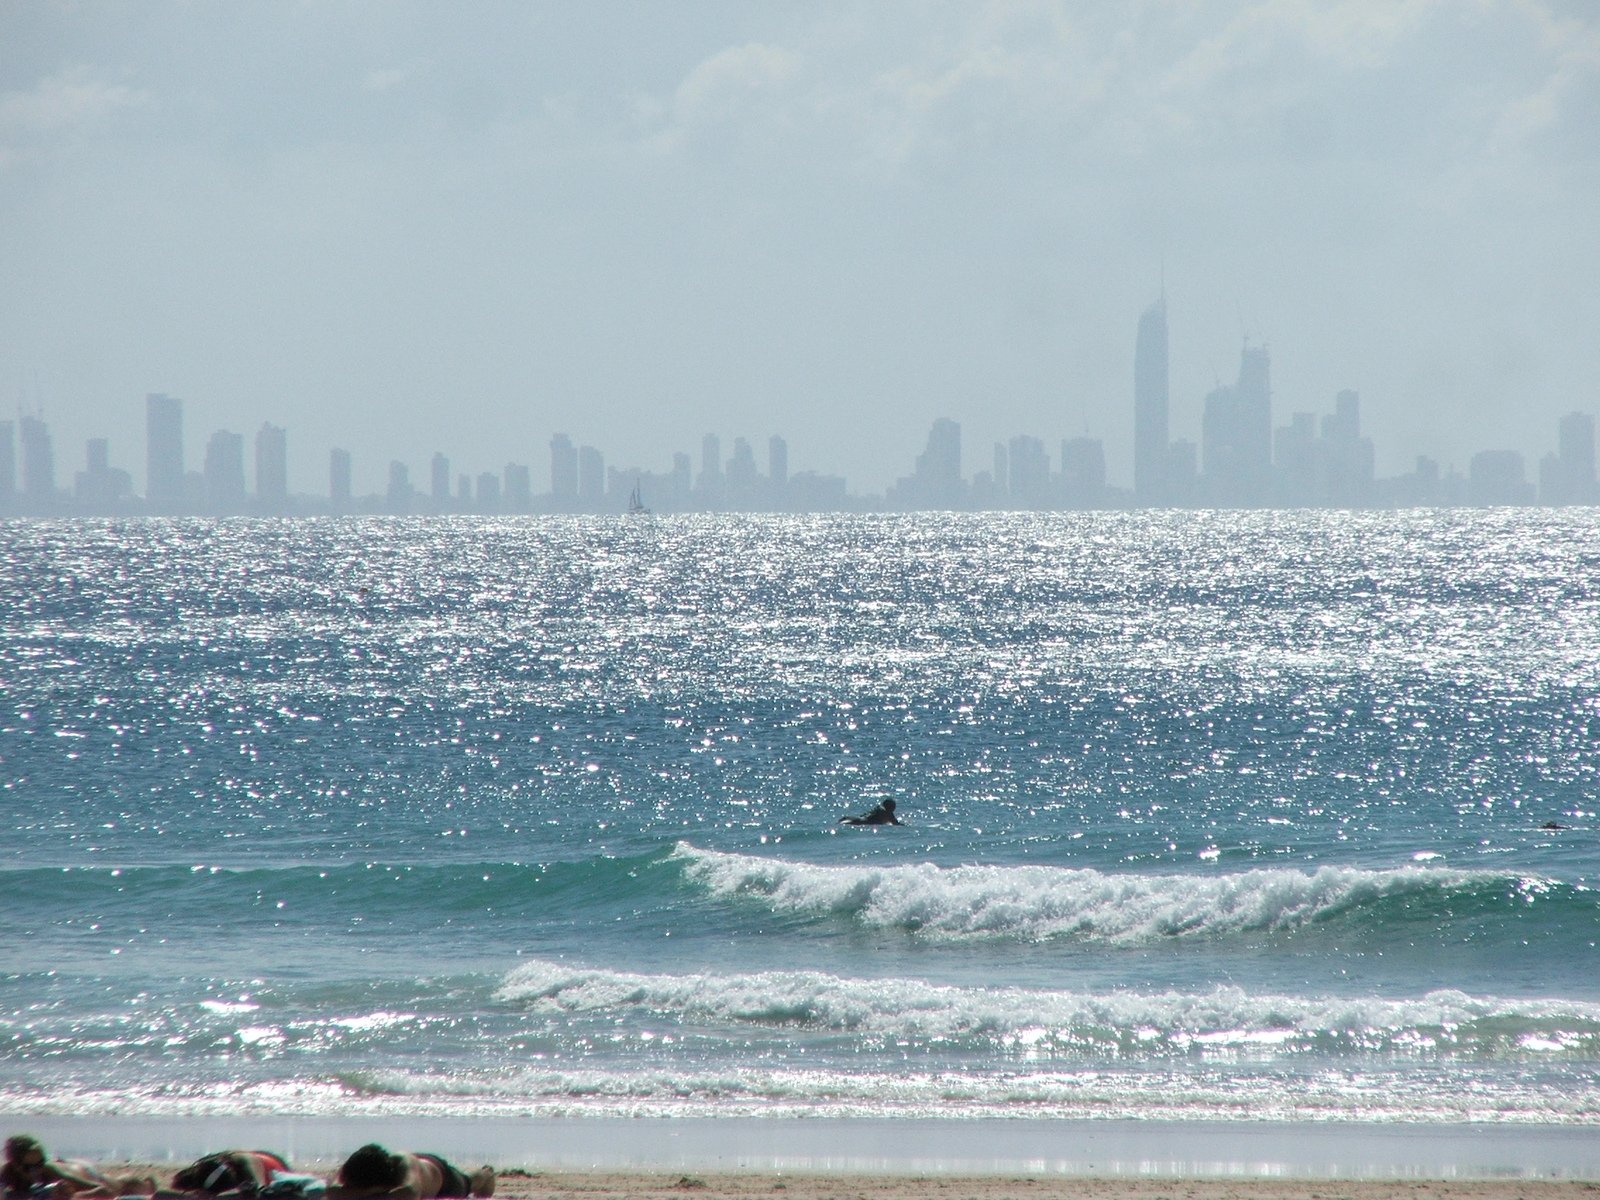 surfer on the ocean and a city skyline in background